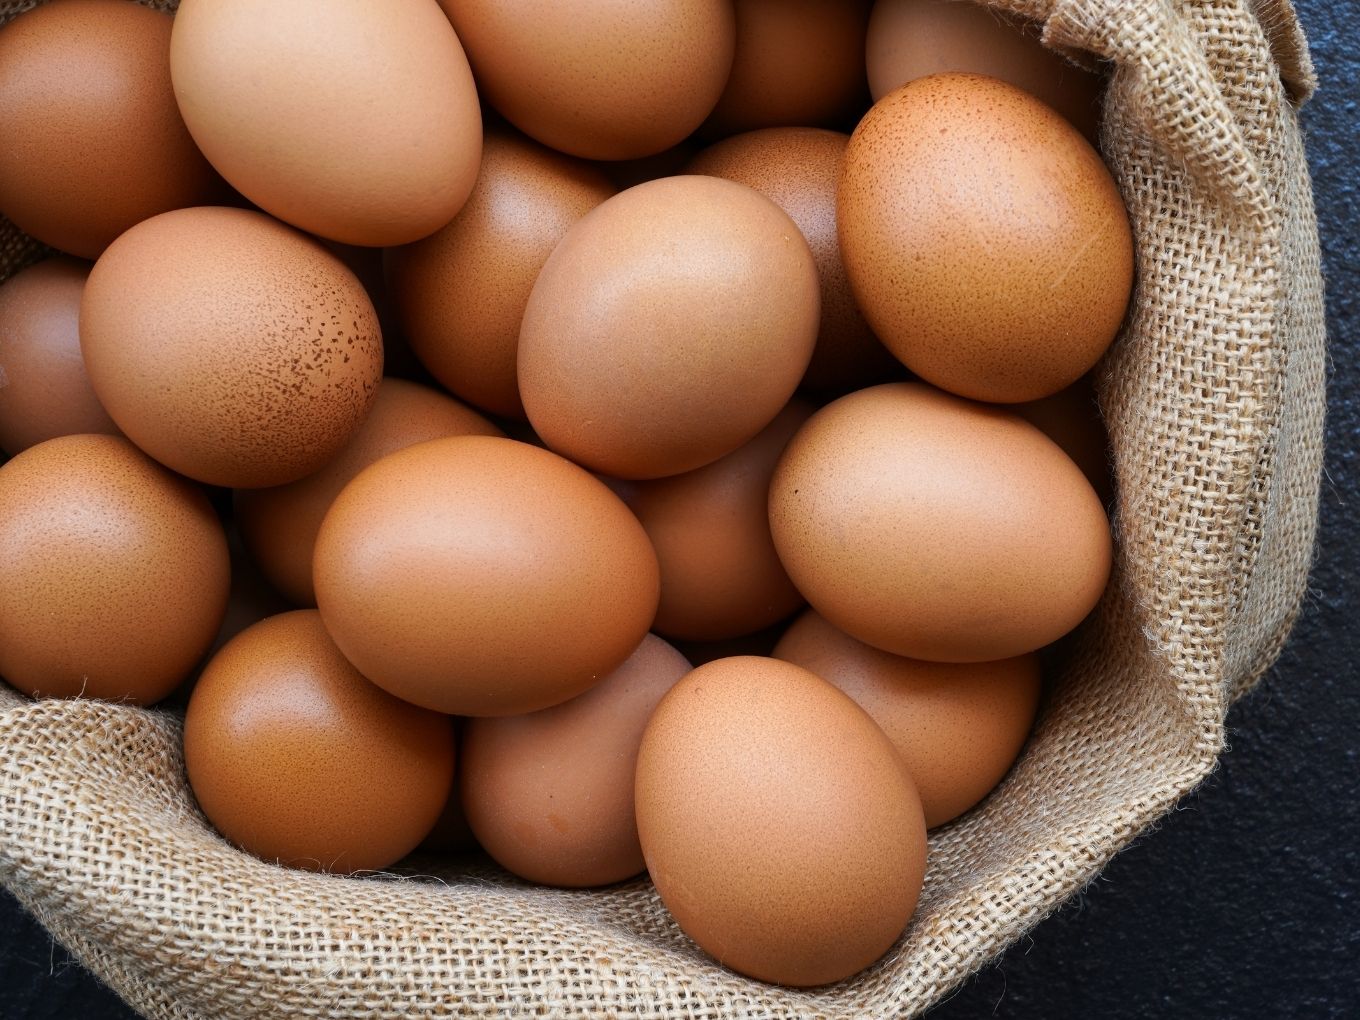 You are currently viewing Egg Procurement And Delivery Startup Eggoz Raises Series A Funds